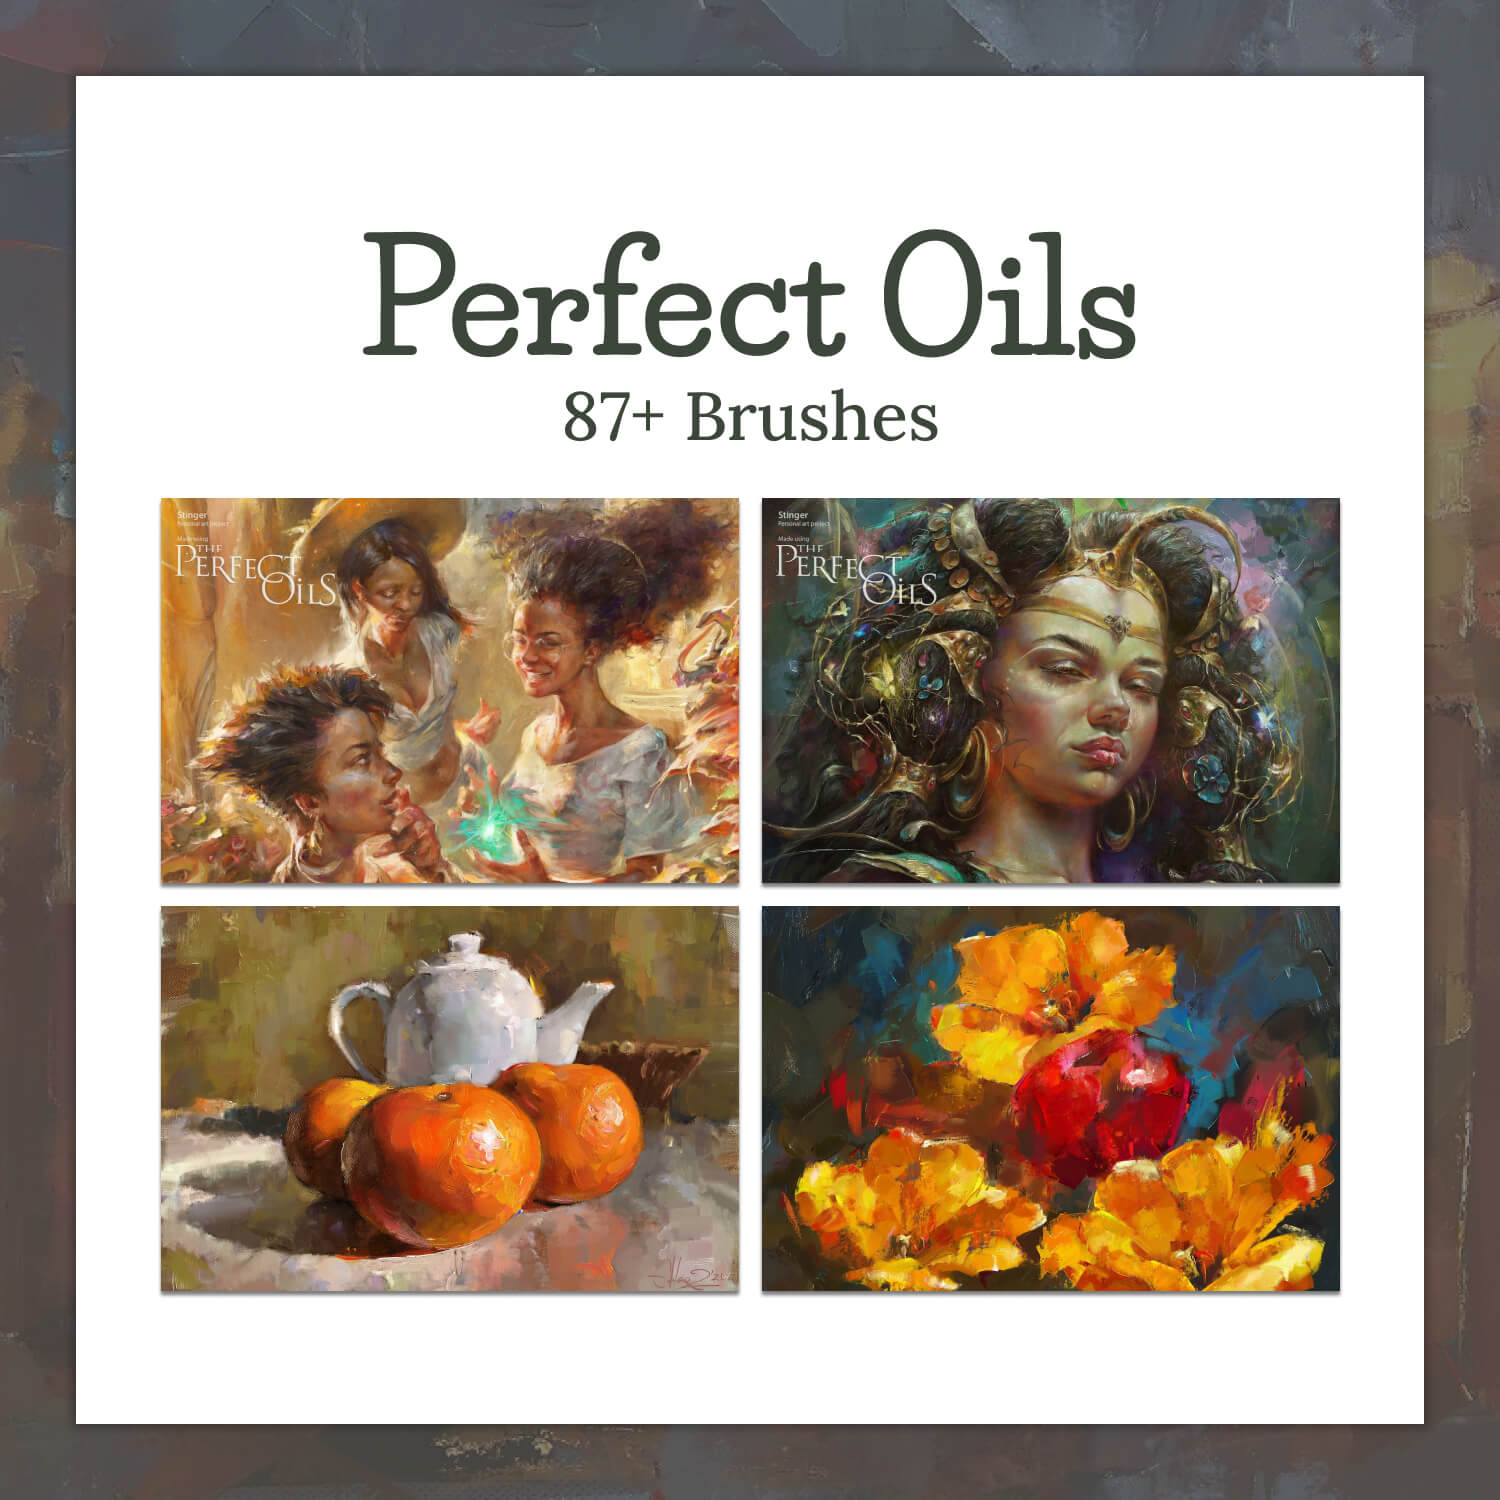 87+ brushes of perfect oils.